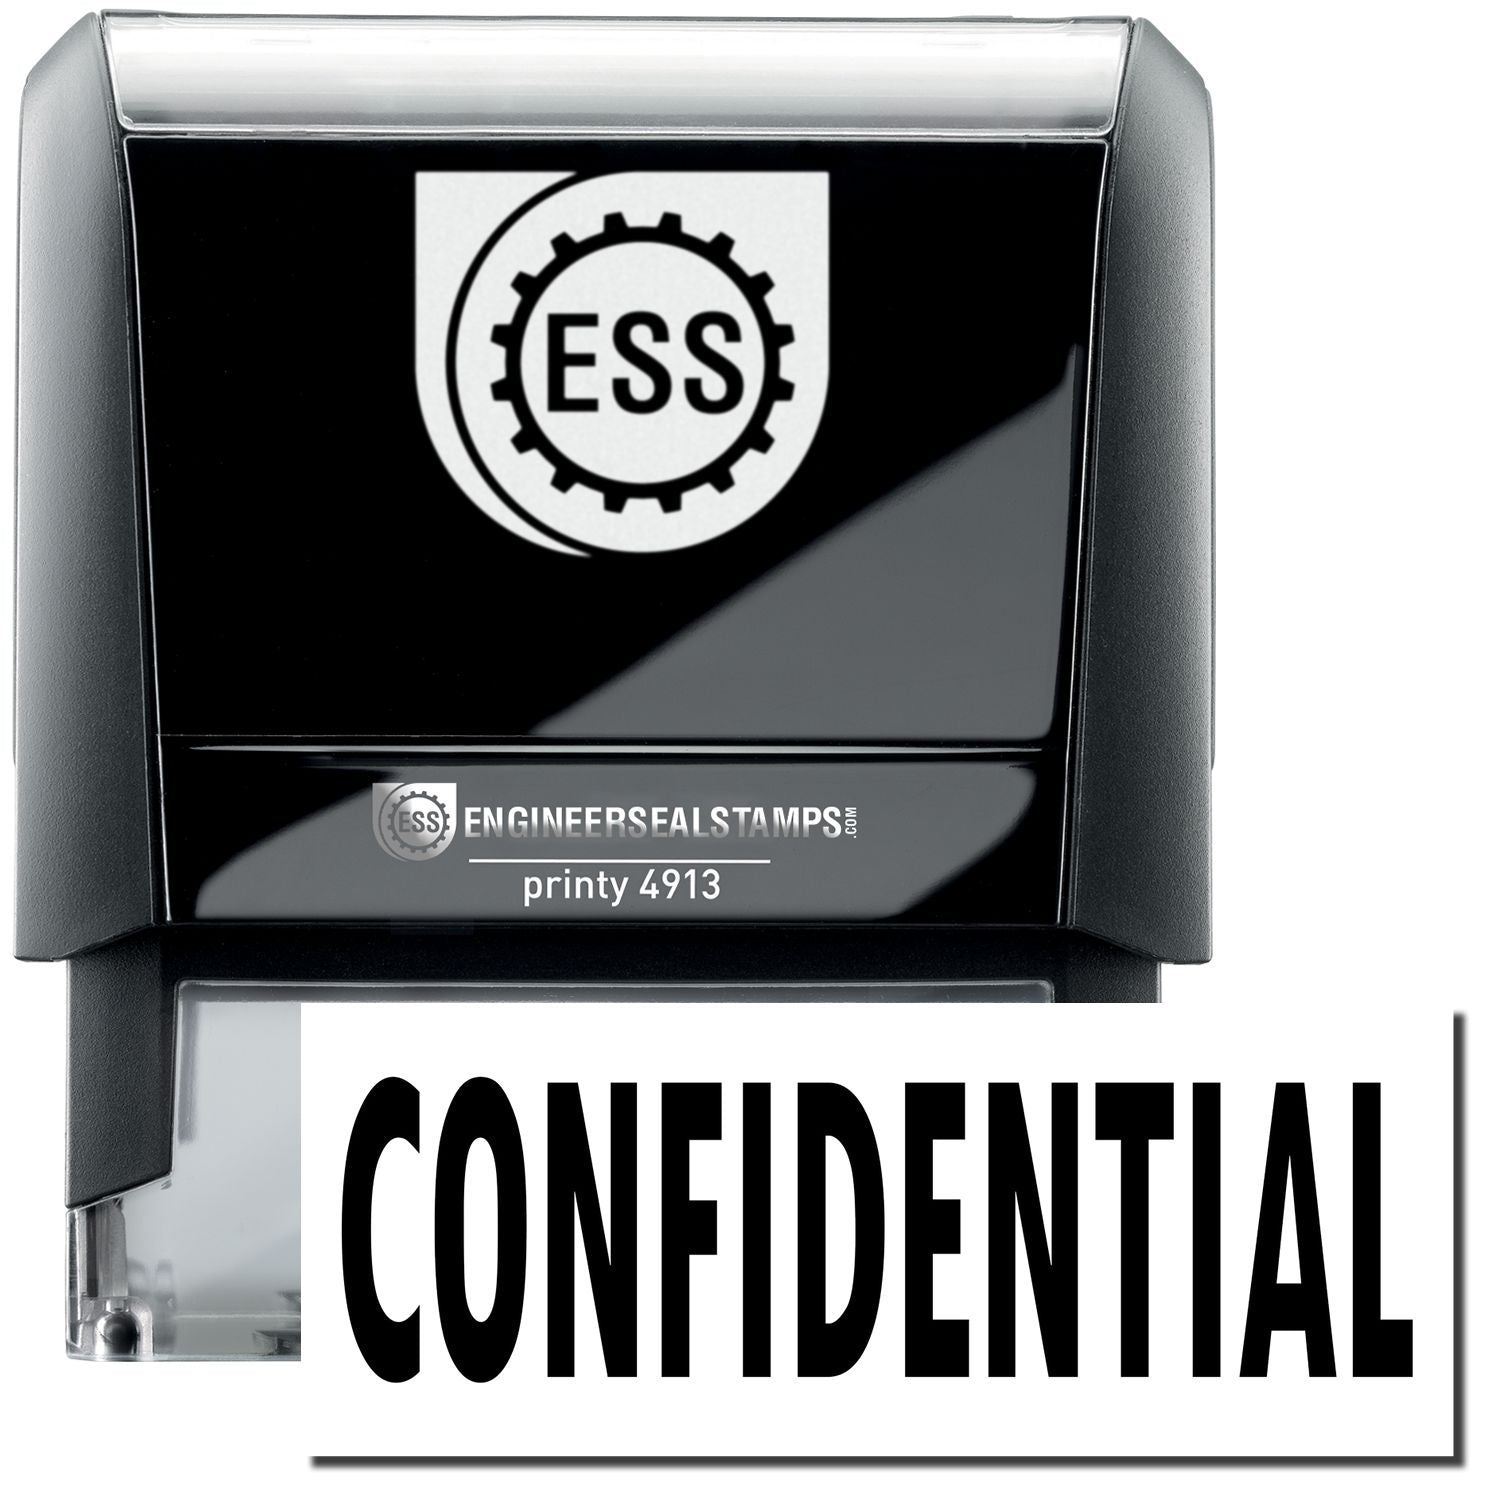 A large self-inking stamp with a stamped image showing how the text "CONFIDENTIAL" in a large bold font is displayed by it.